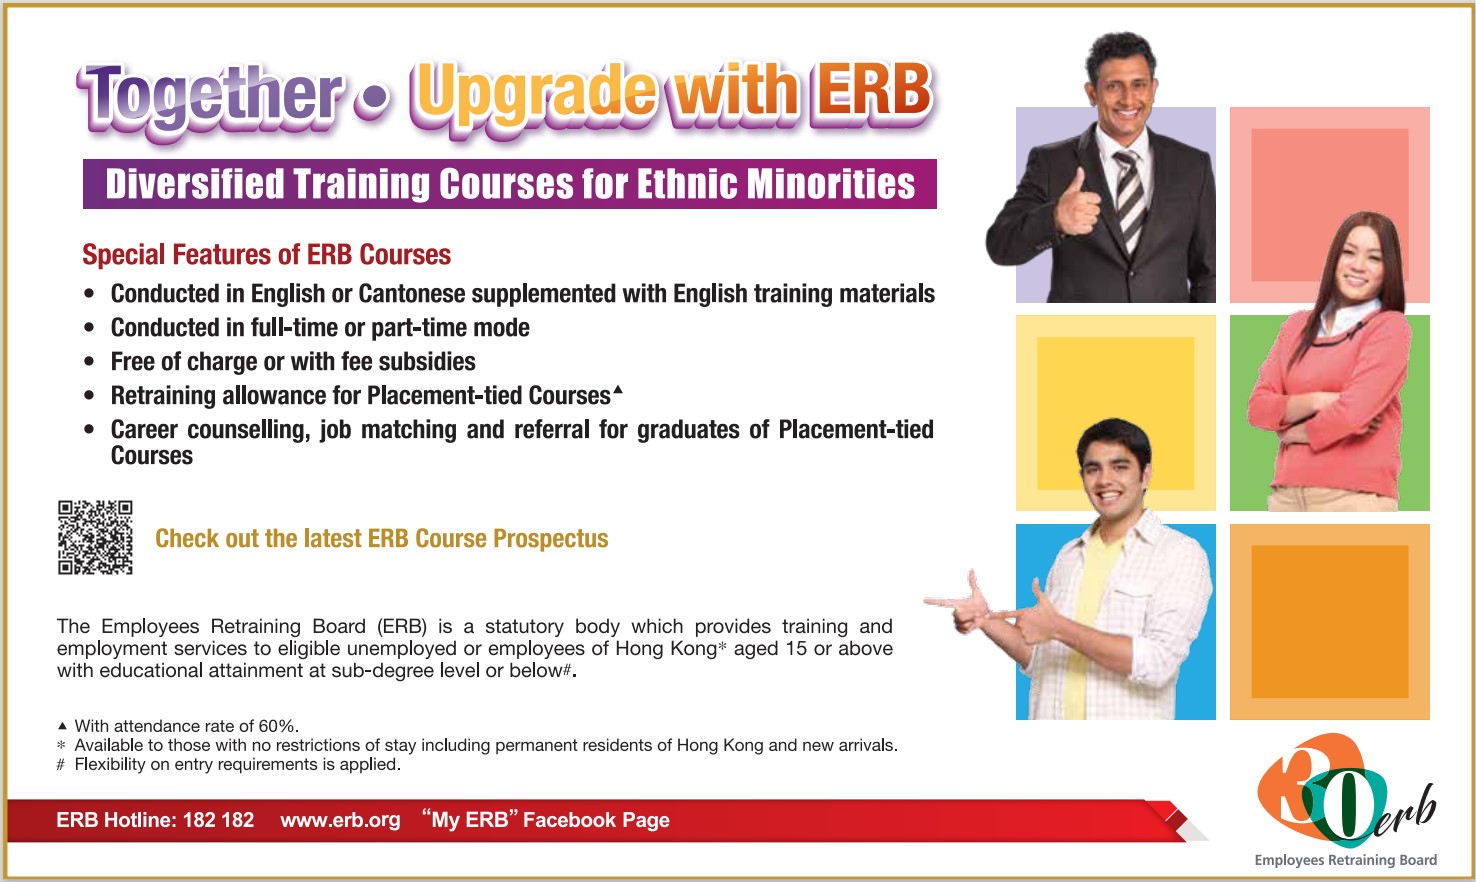 Click here to download the image version of newspaper advertisement of Training for Ethnic Minorities (June 2022) (English)